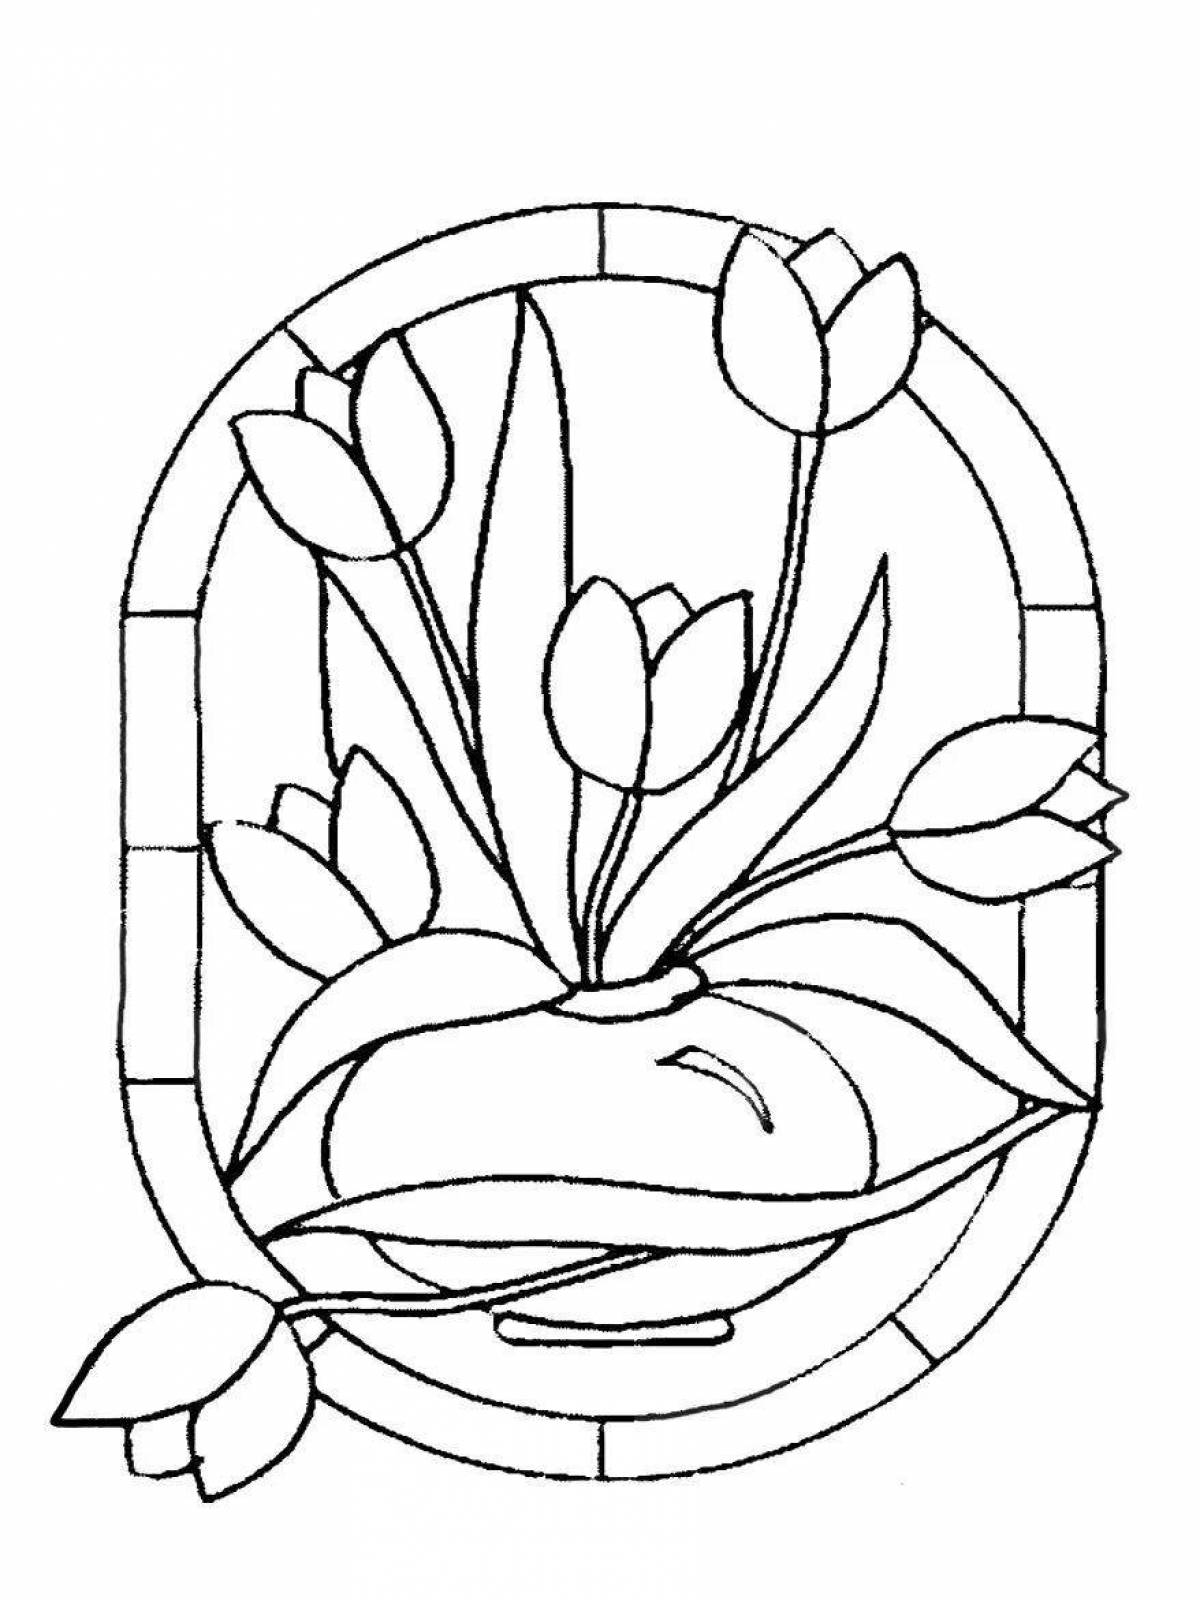 Colorful stained glass coloring pages for kids